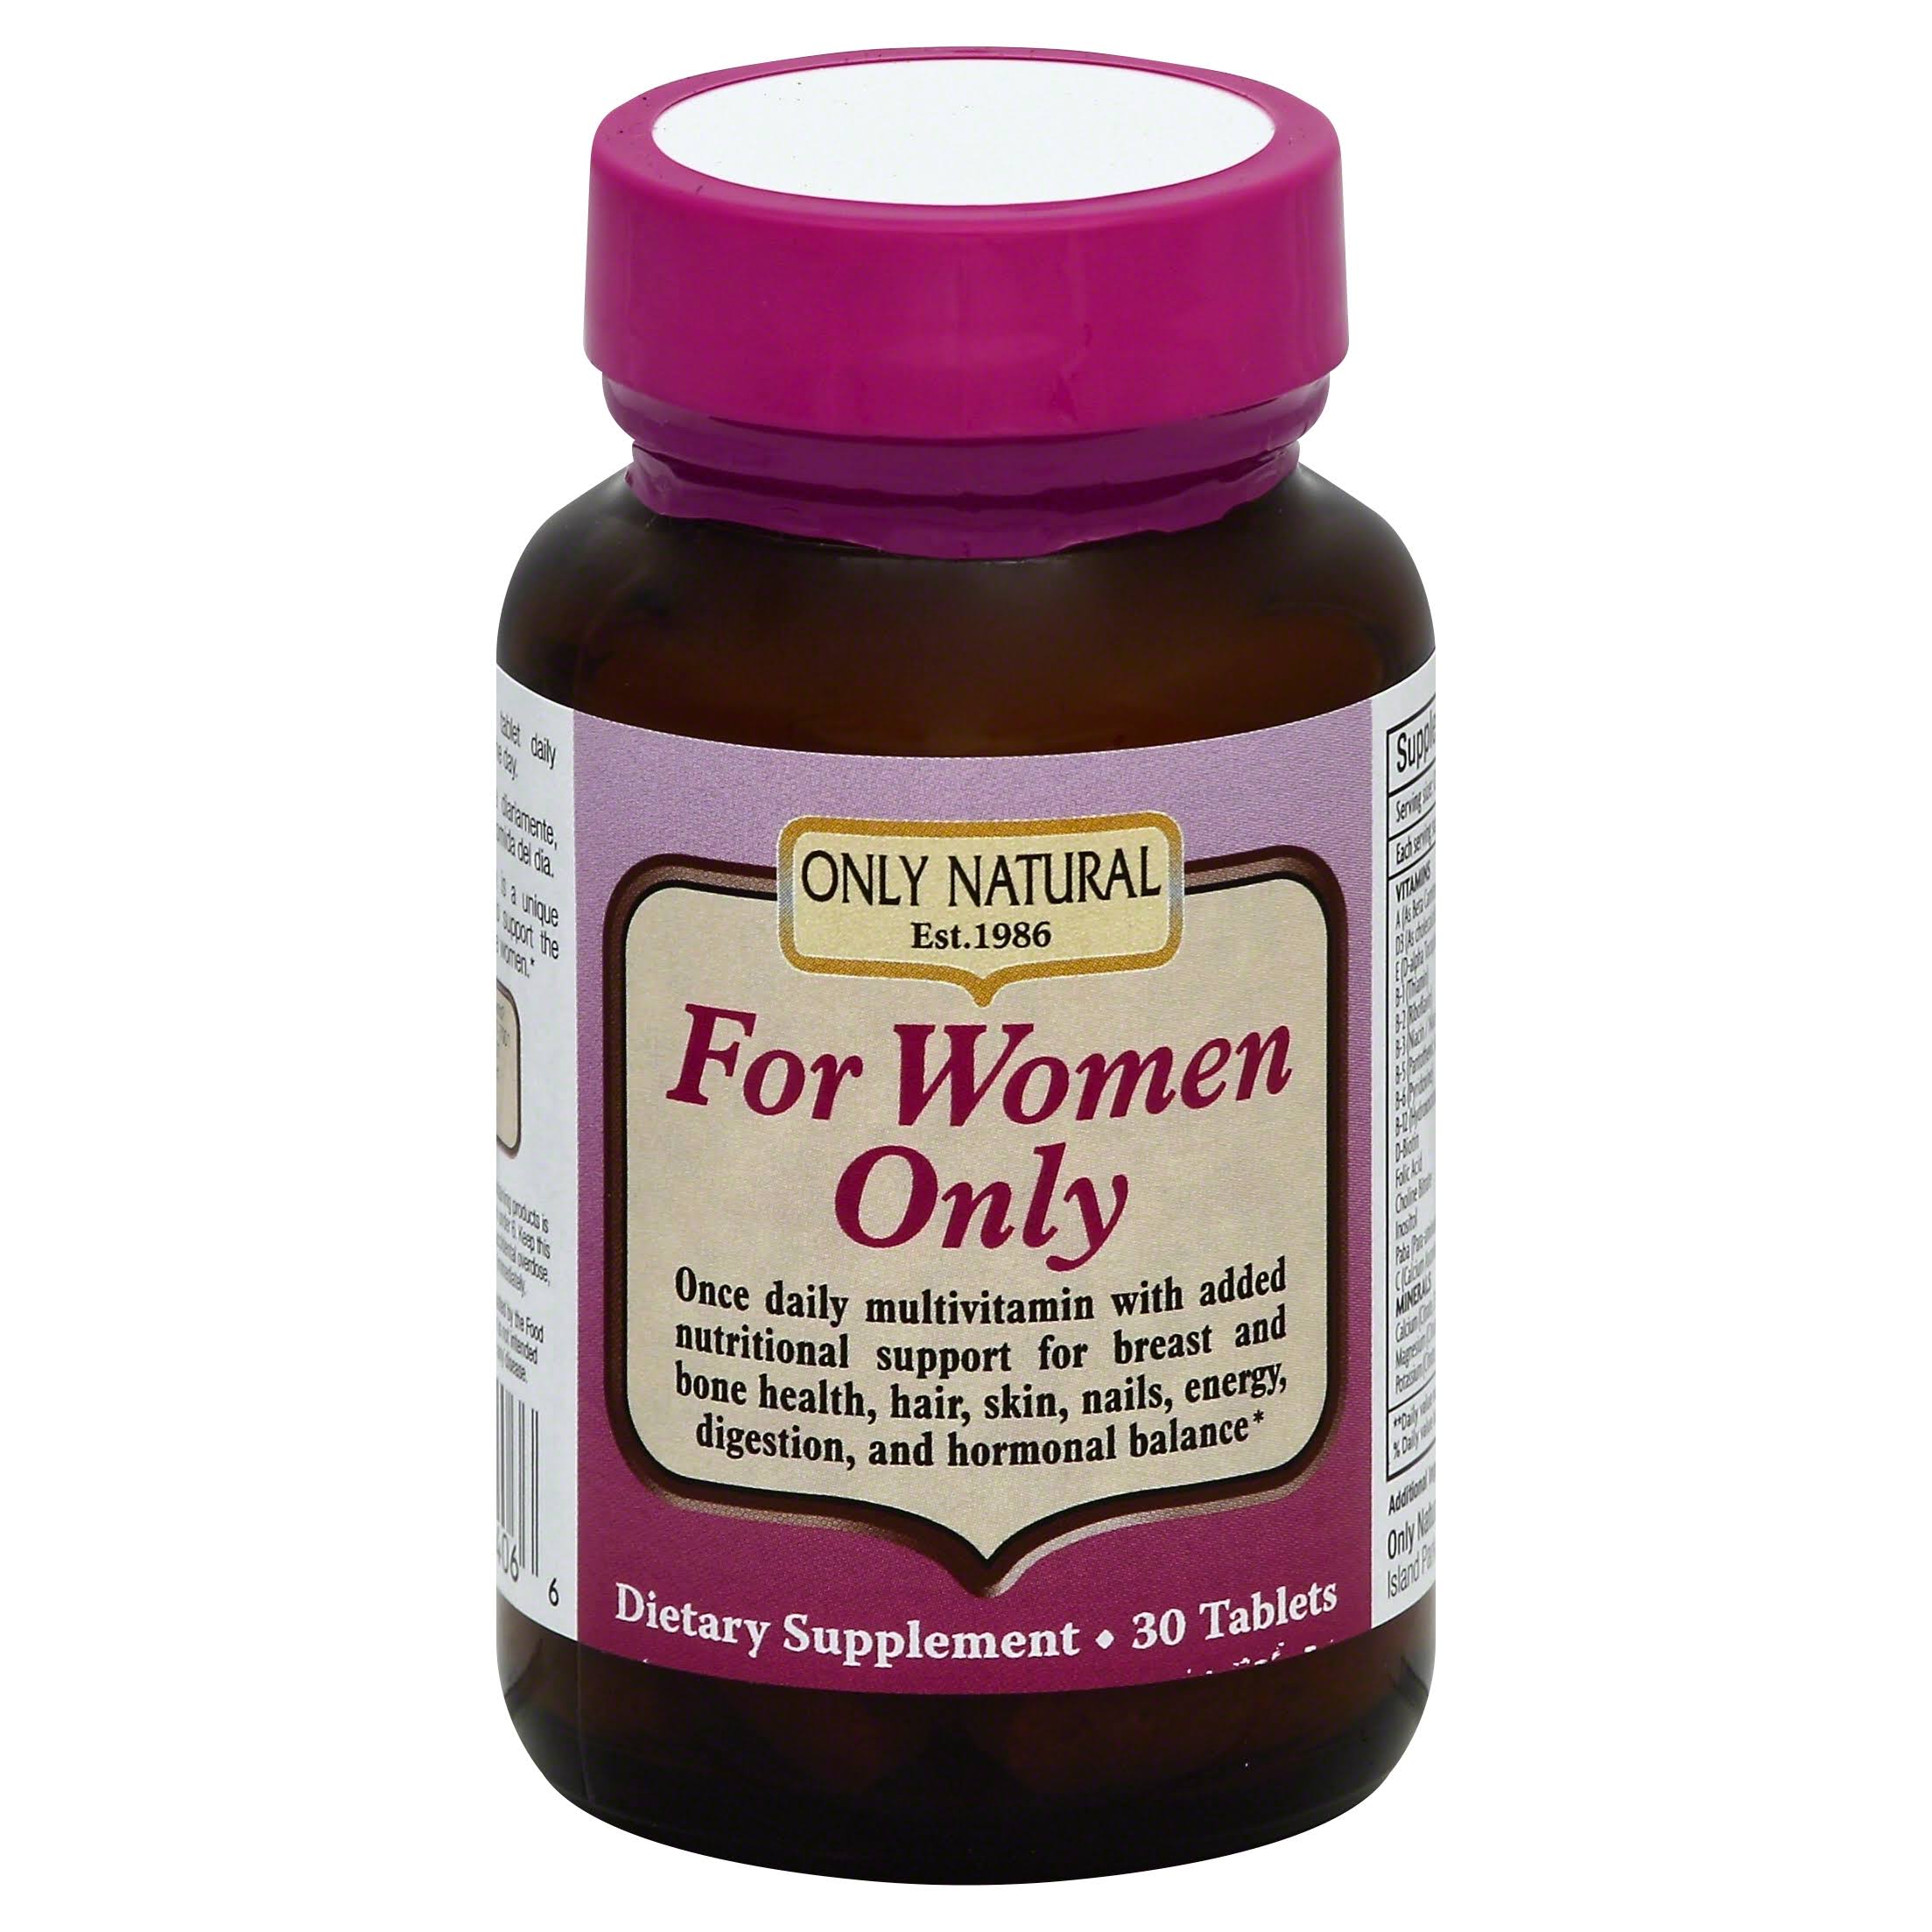 Only Natural For Women Only, Tablets - 30 tablets